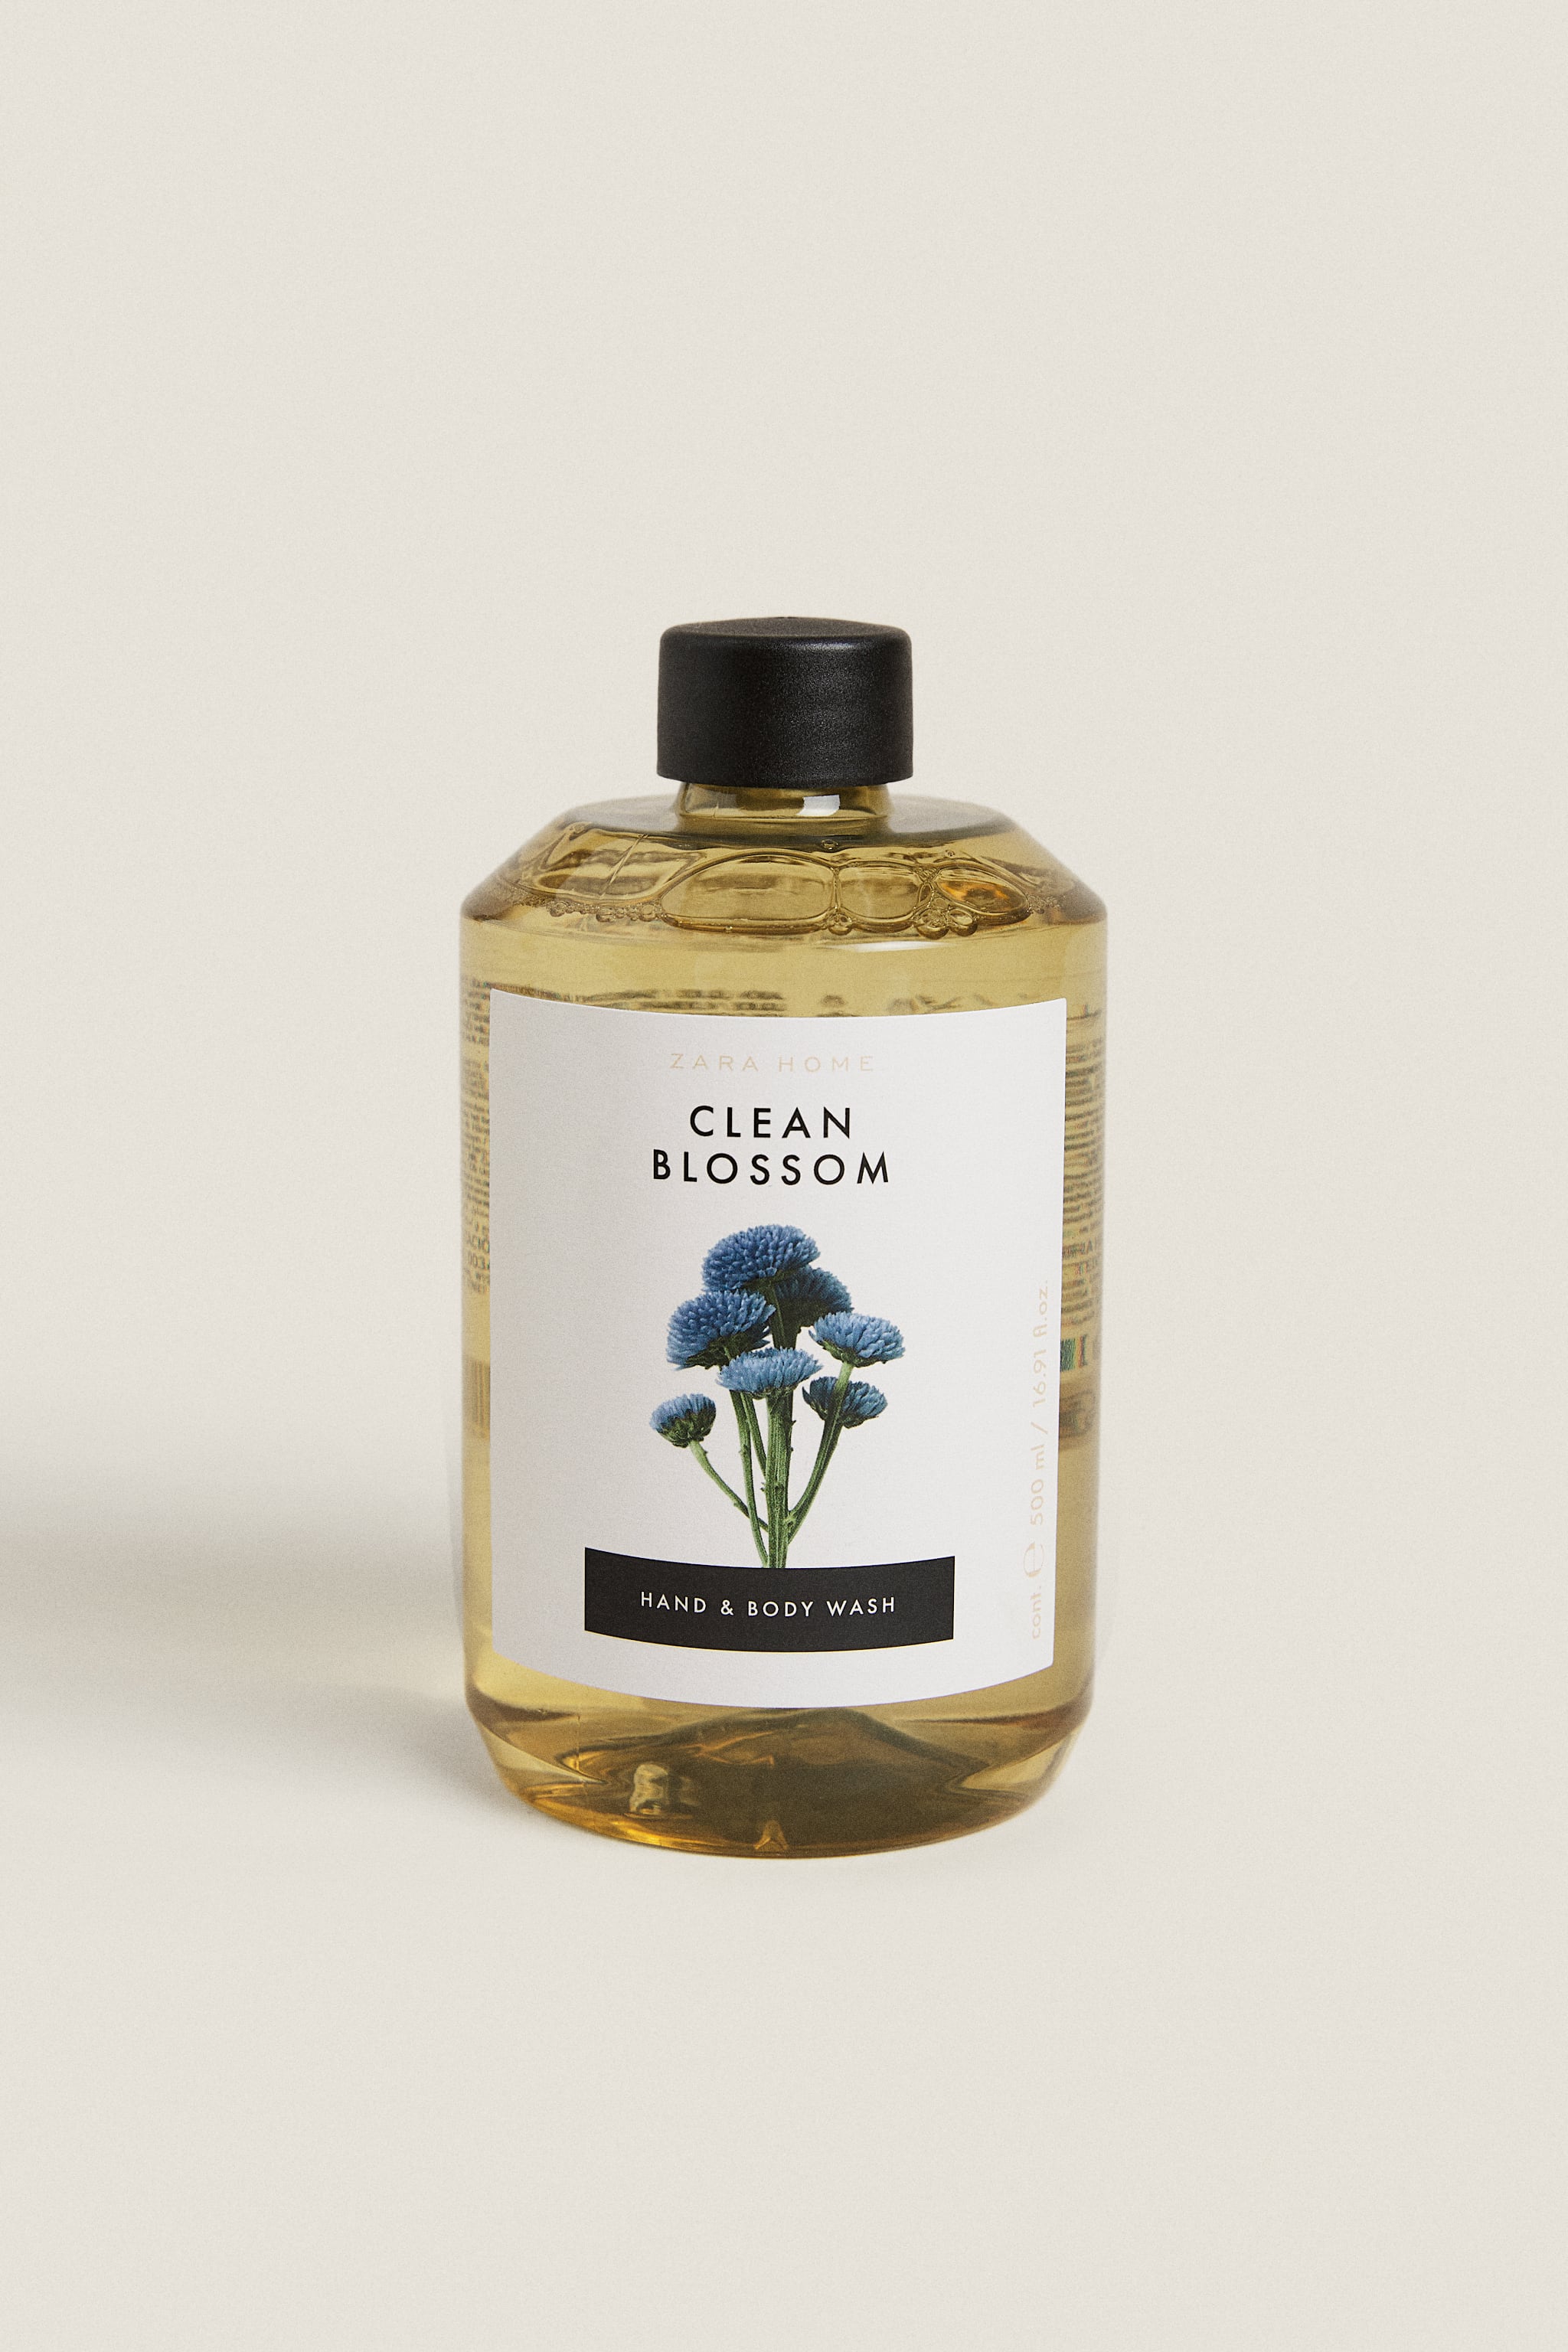 (16.91 oz) CLEAN BLOSSOM LIQUID BODY AND HAND SOAP